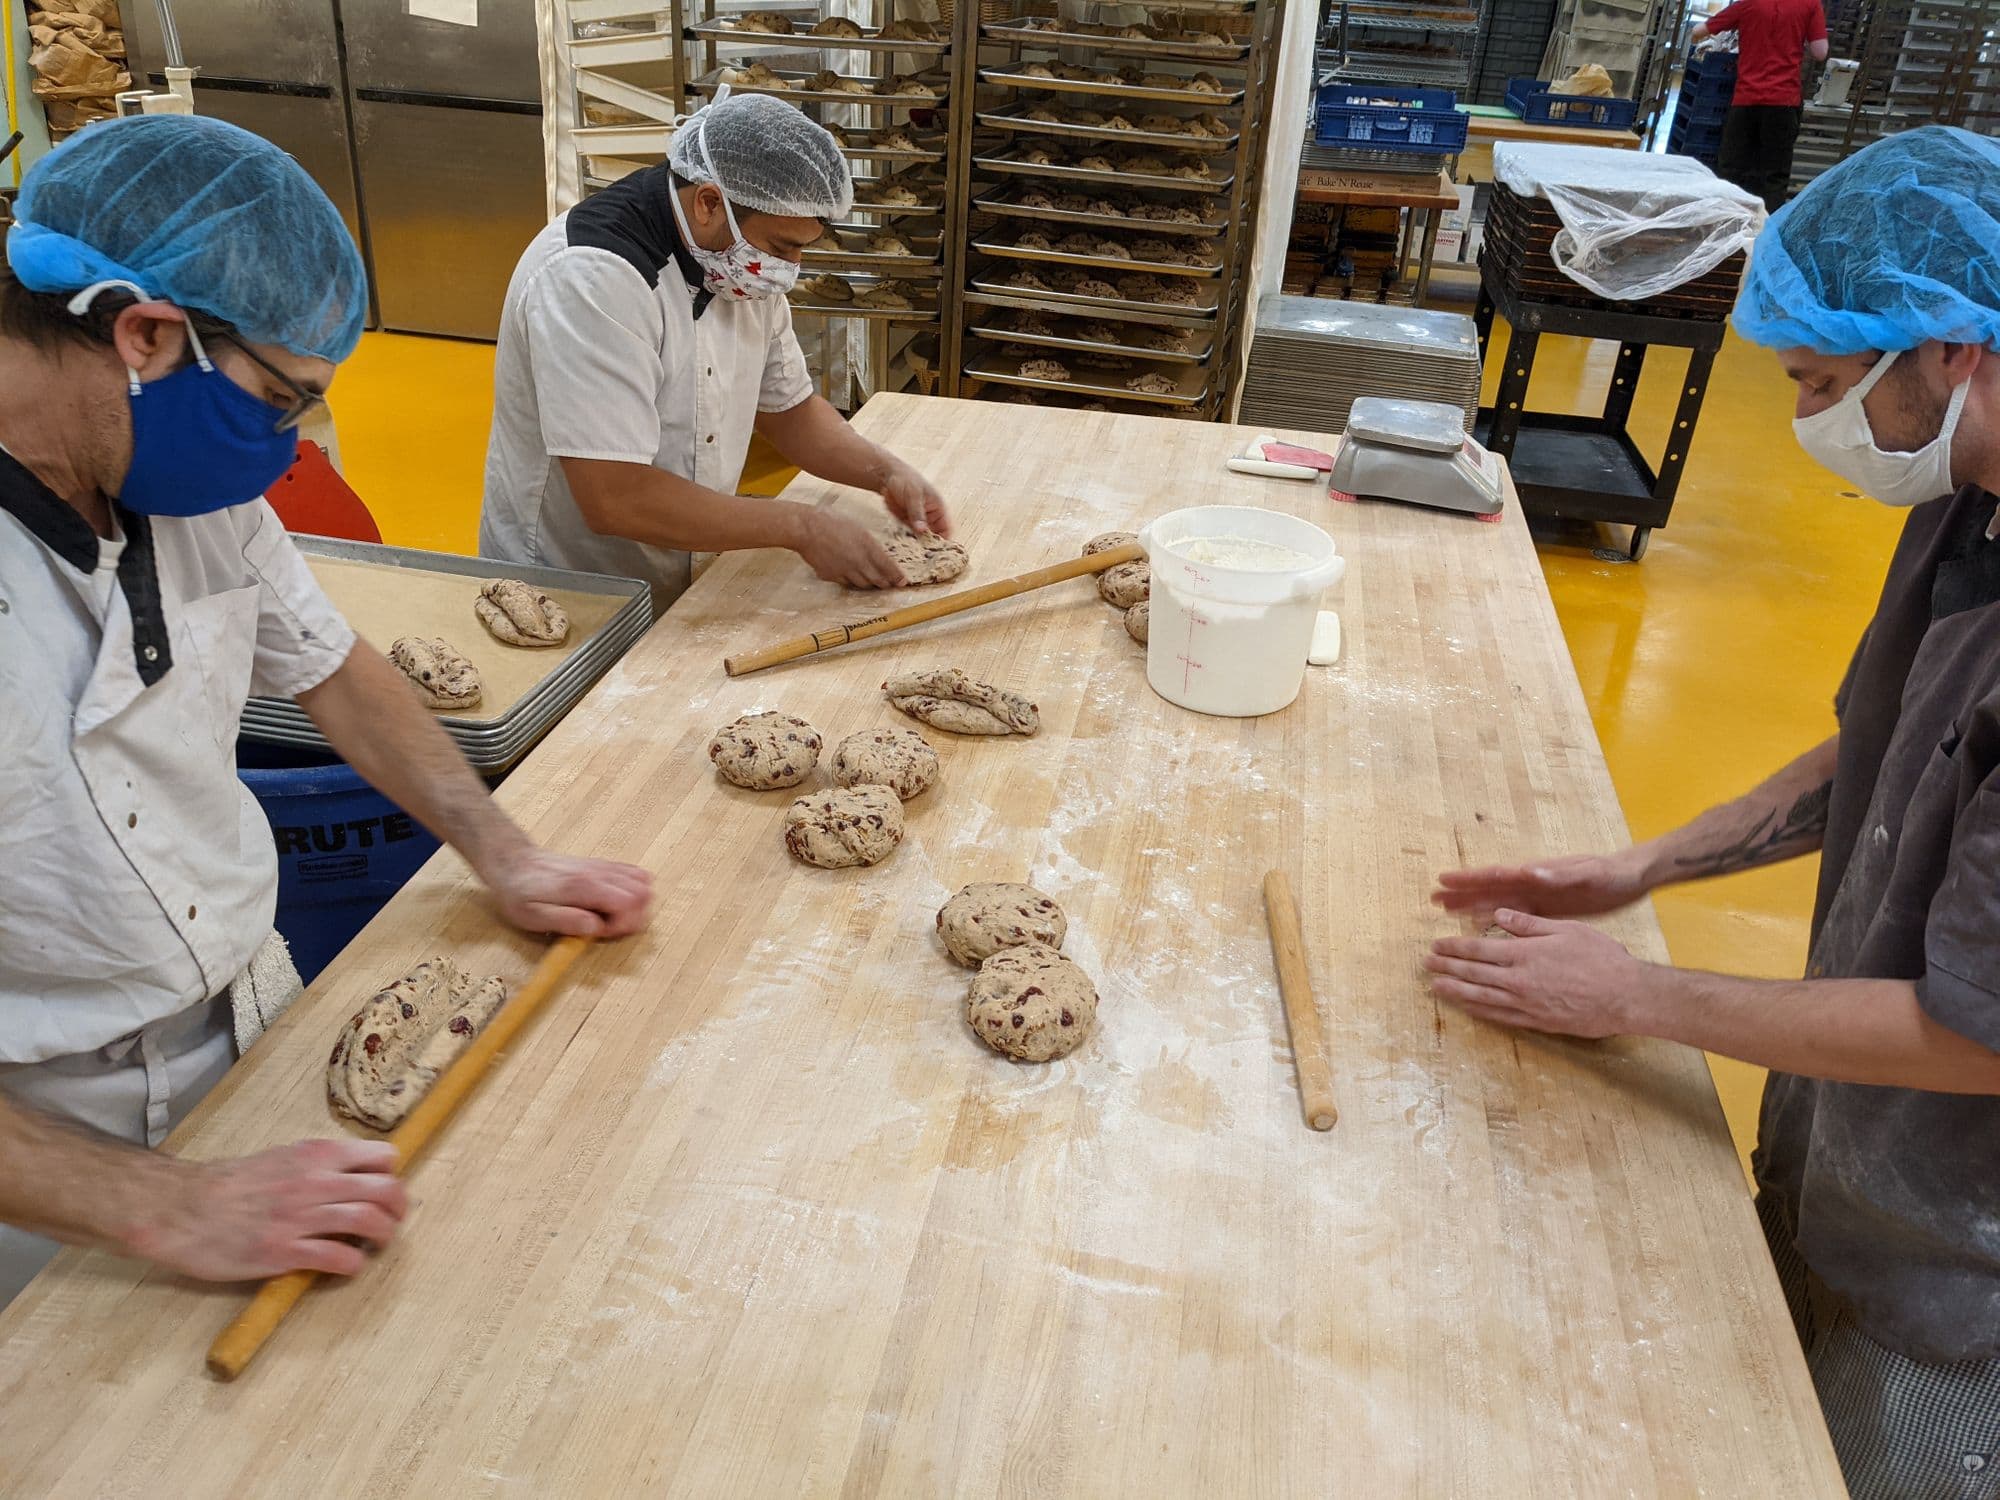 Three bakers in a bakery rolling out dough for bread